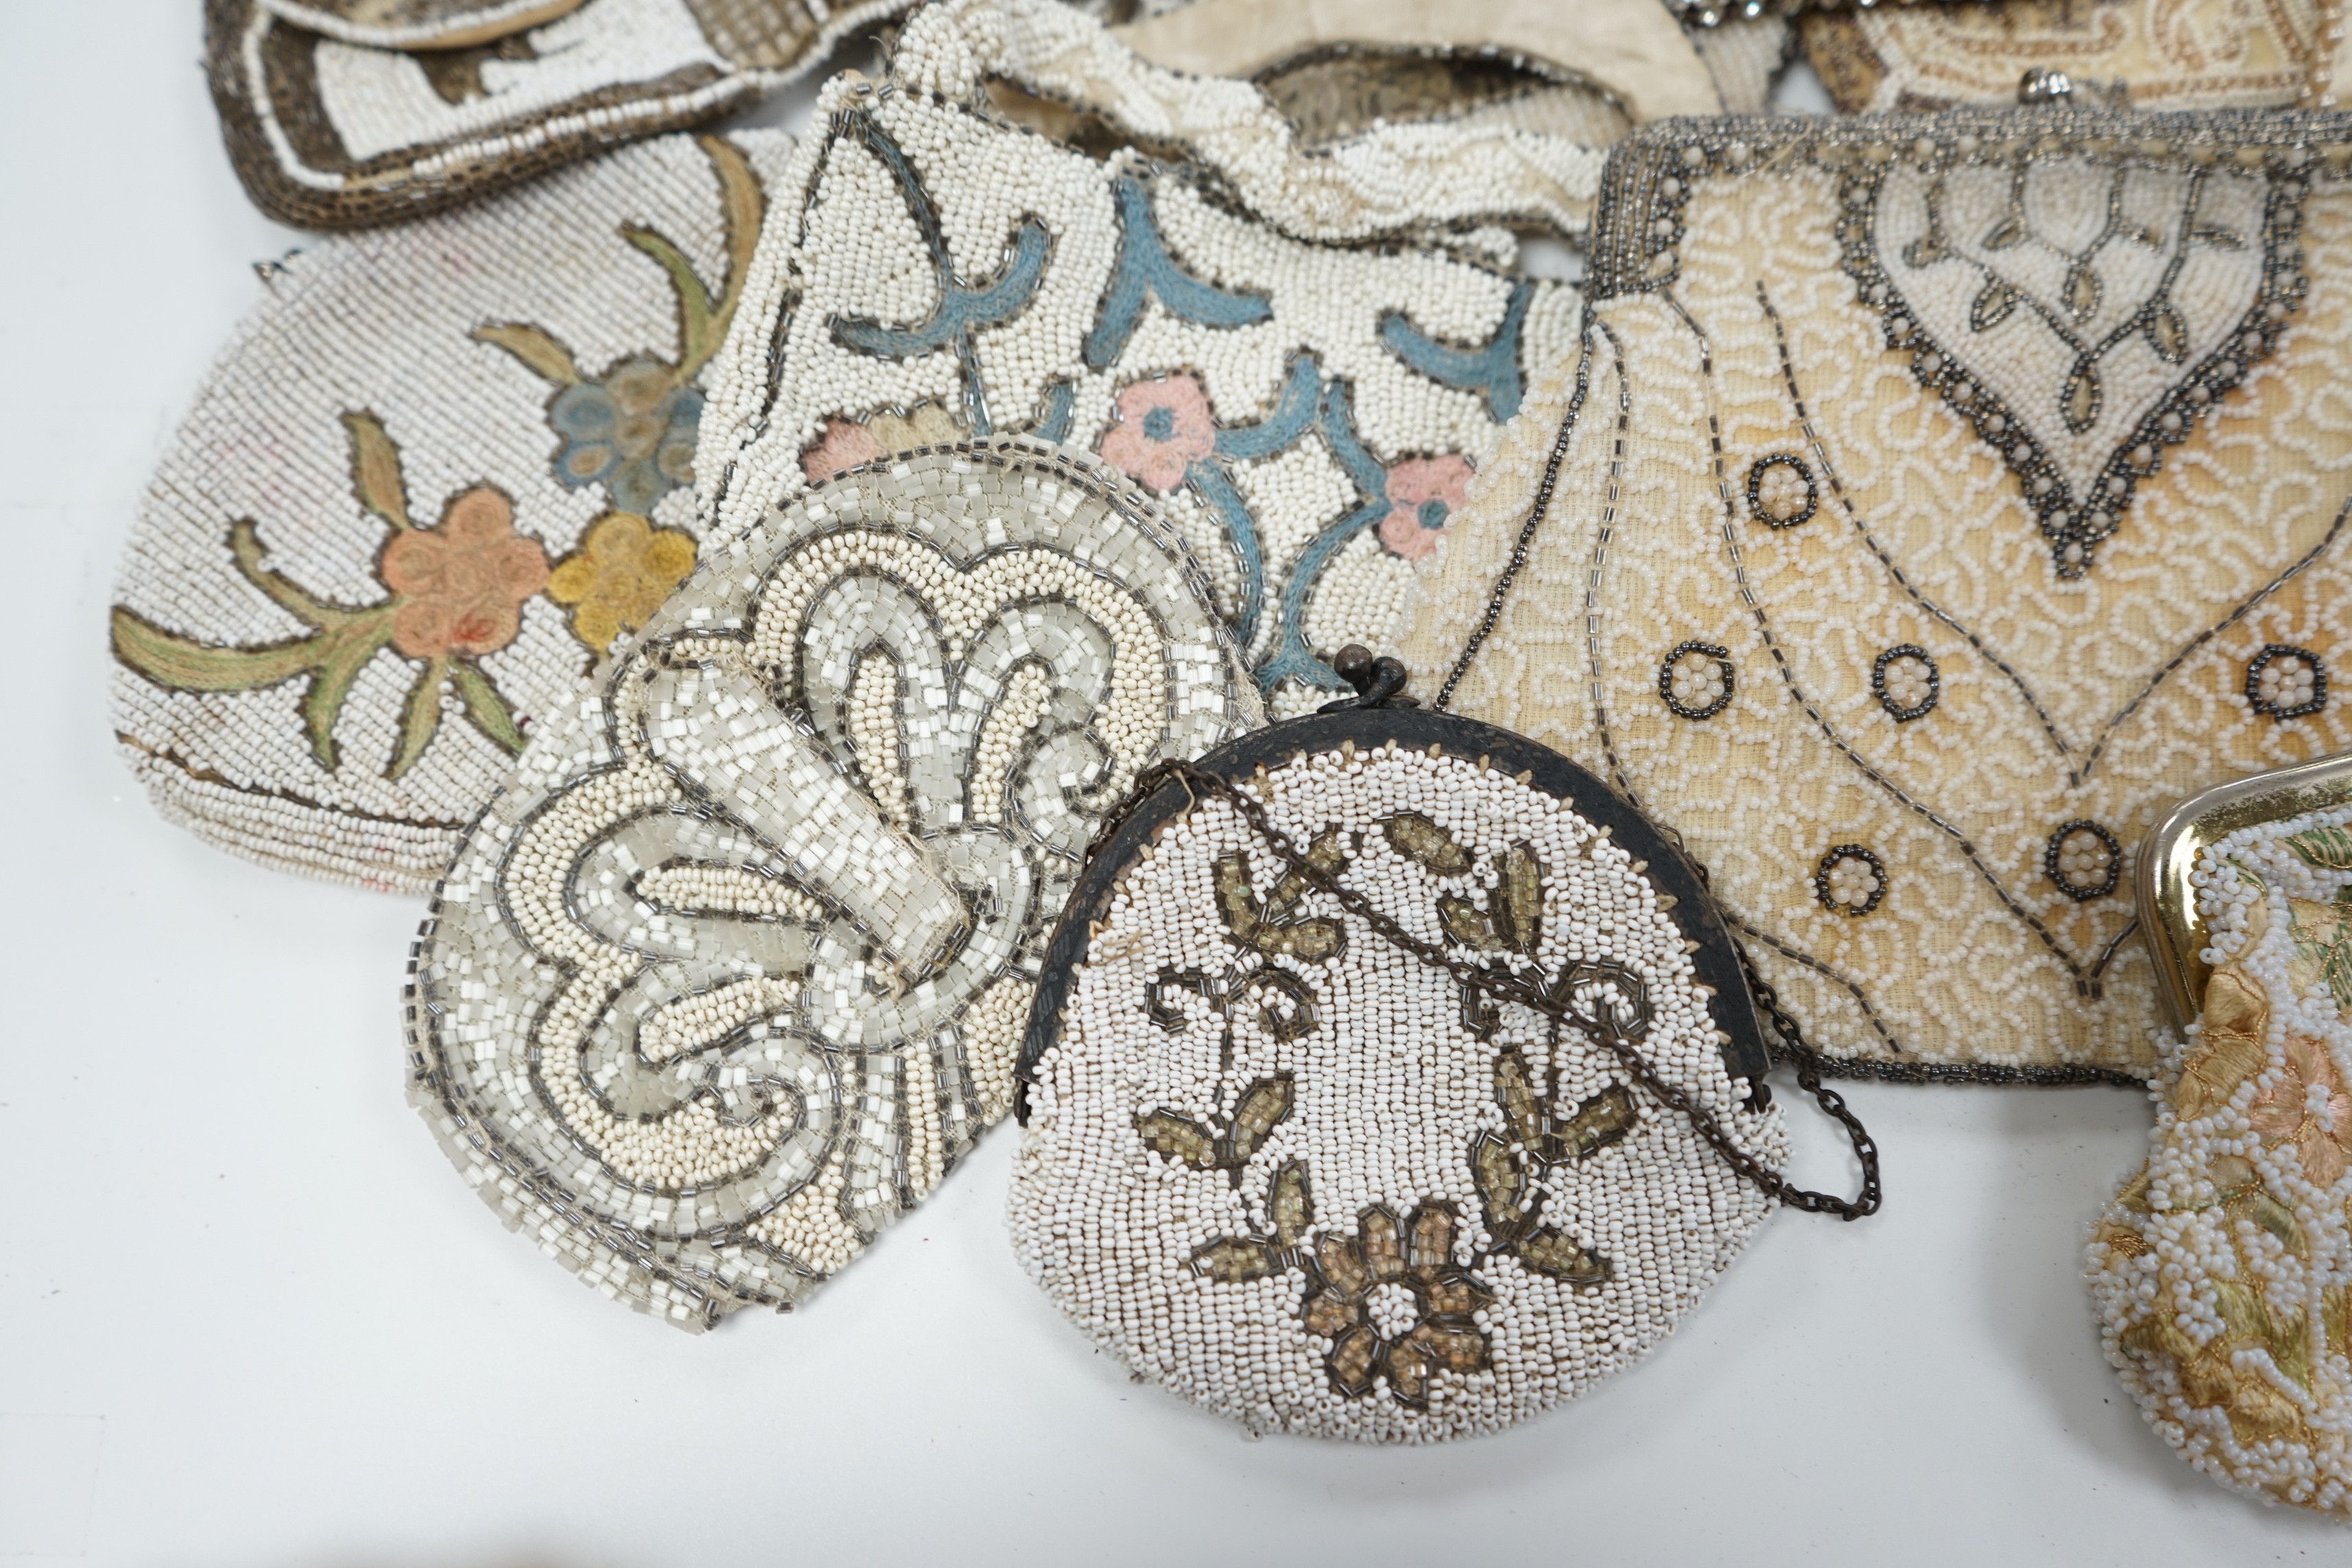 Twelve 1930’s beaded, sequin and pearl evening clutch bags and bags, some with embroidered decoration